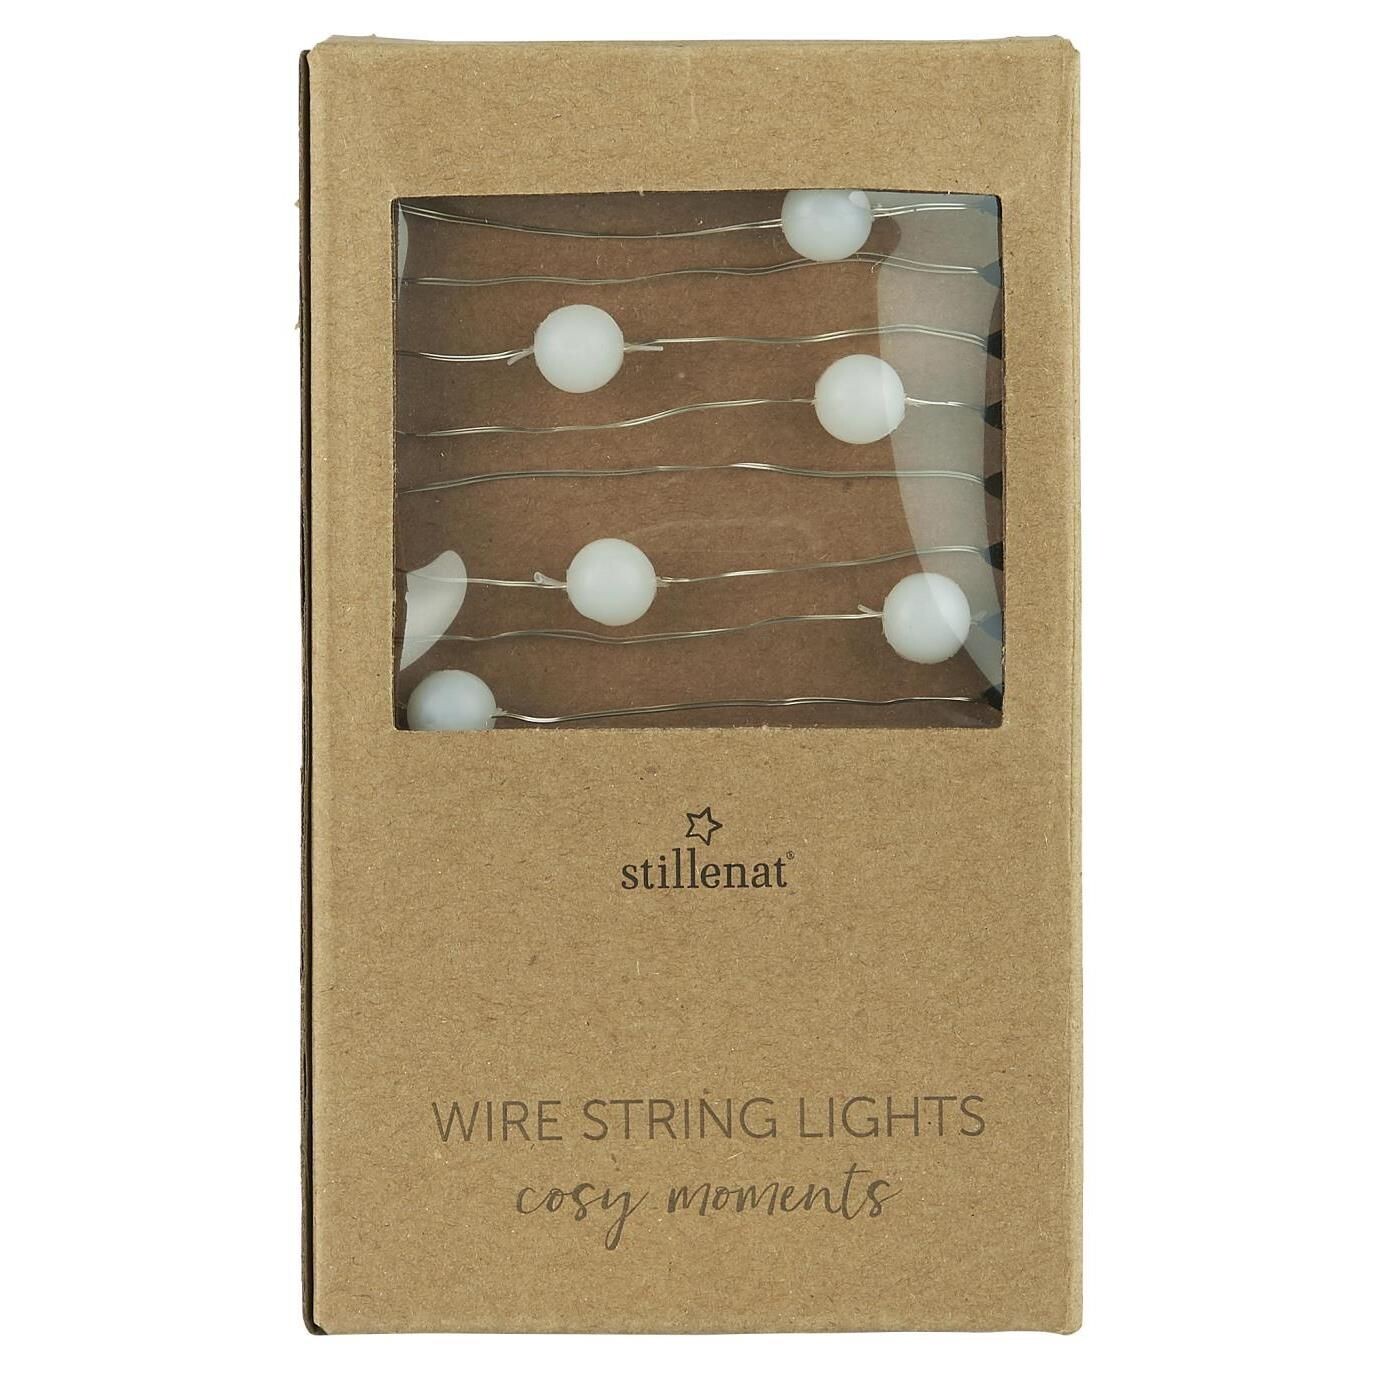 SNOWBALL LED LIGHTS ON A WIRE STRING - 40 LIGHTS